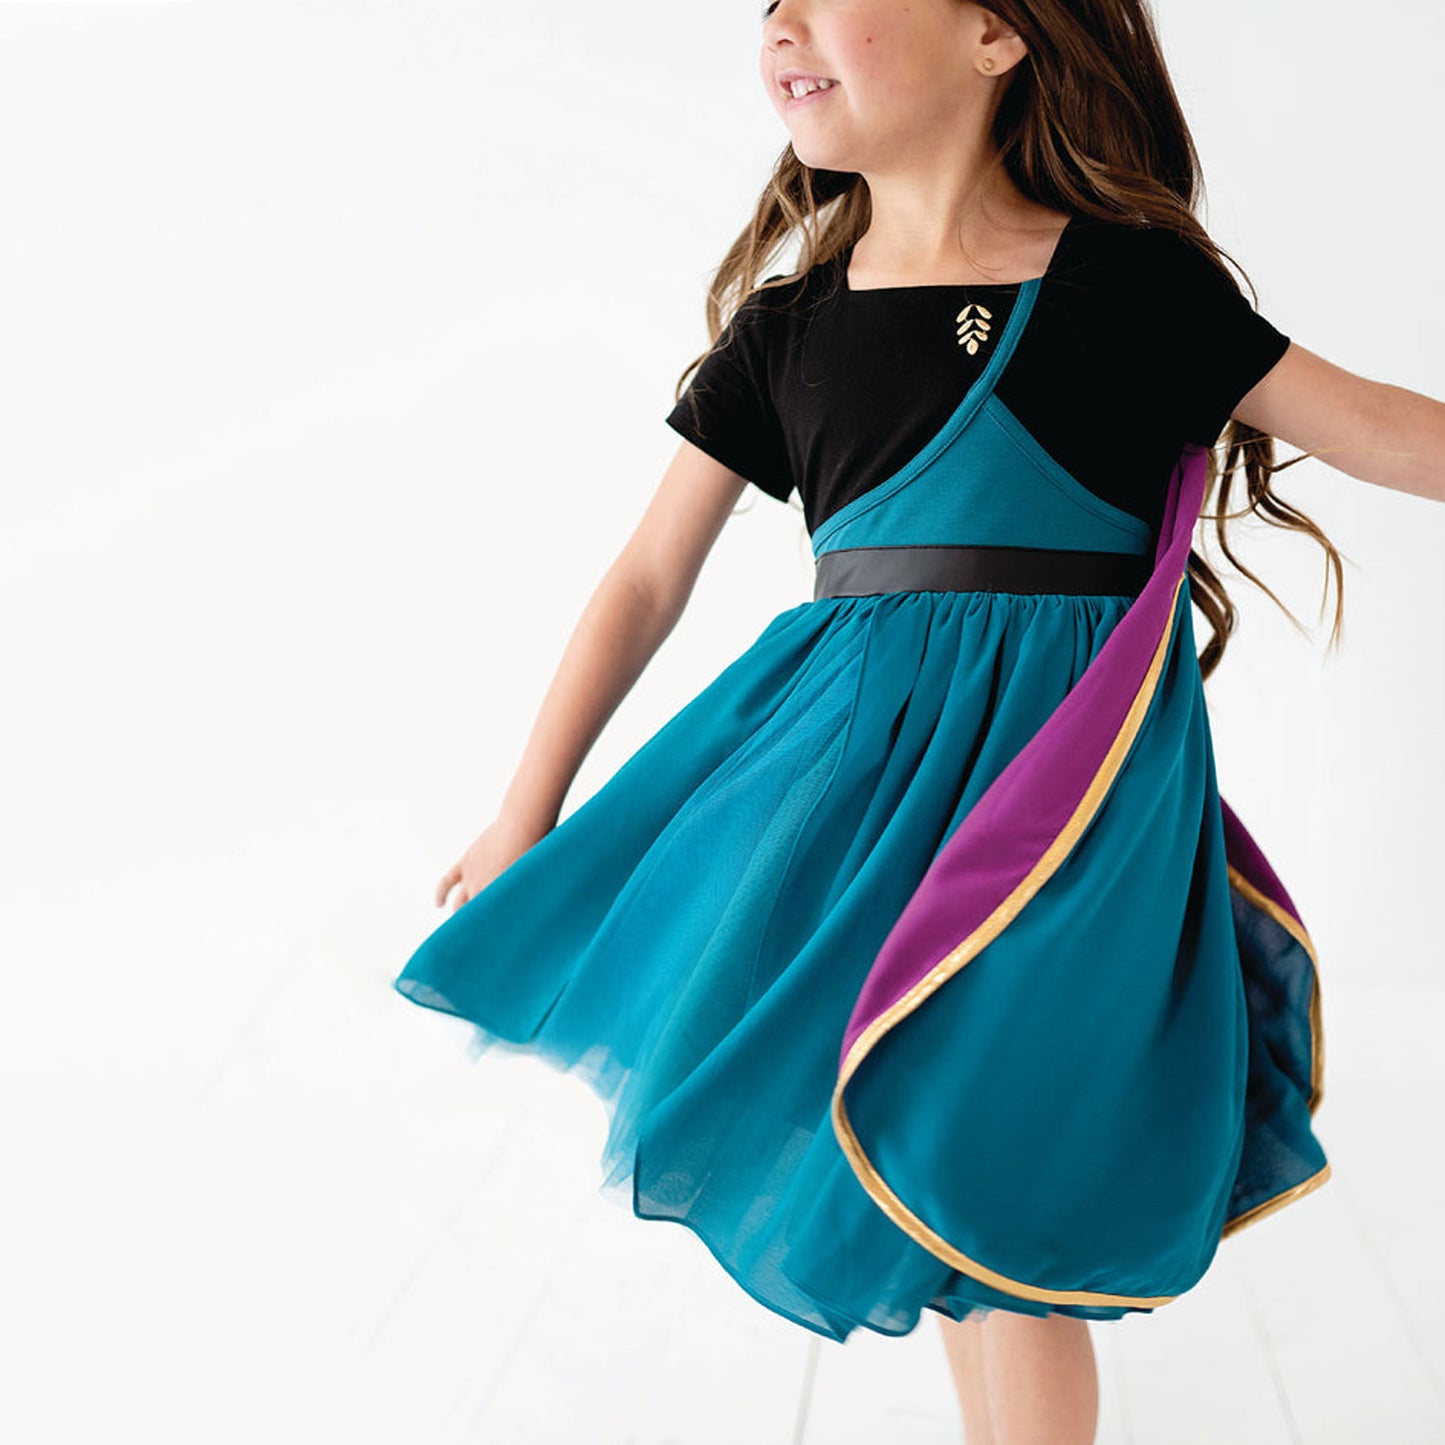 Taylor Joelle Teal Gown with Cape